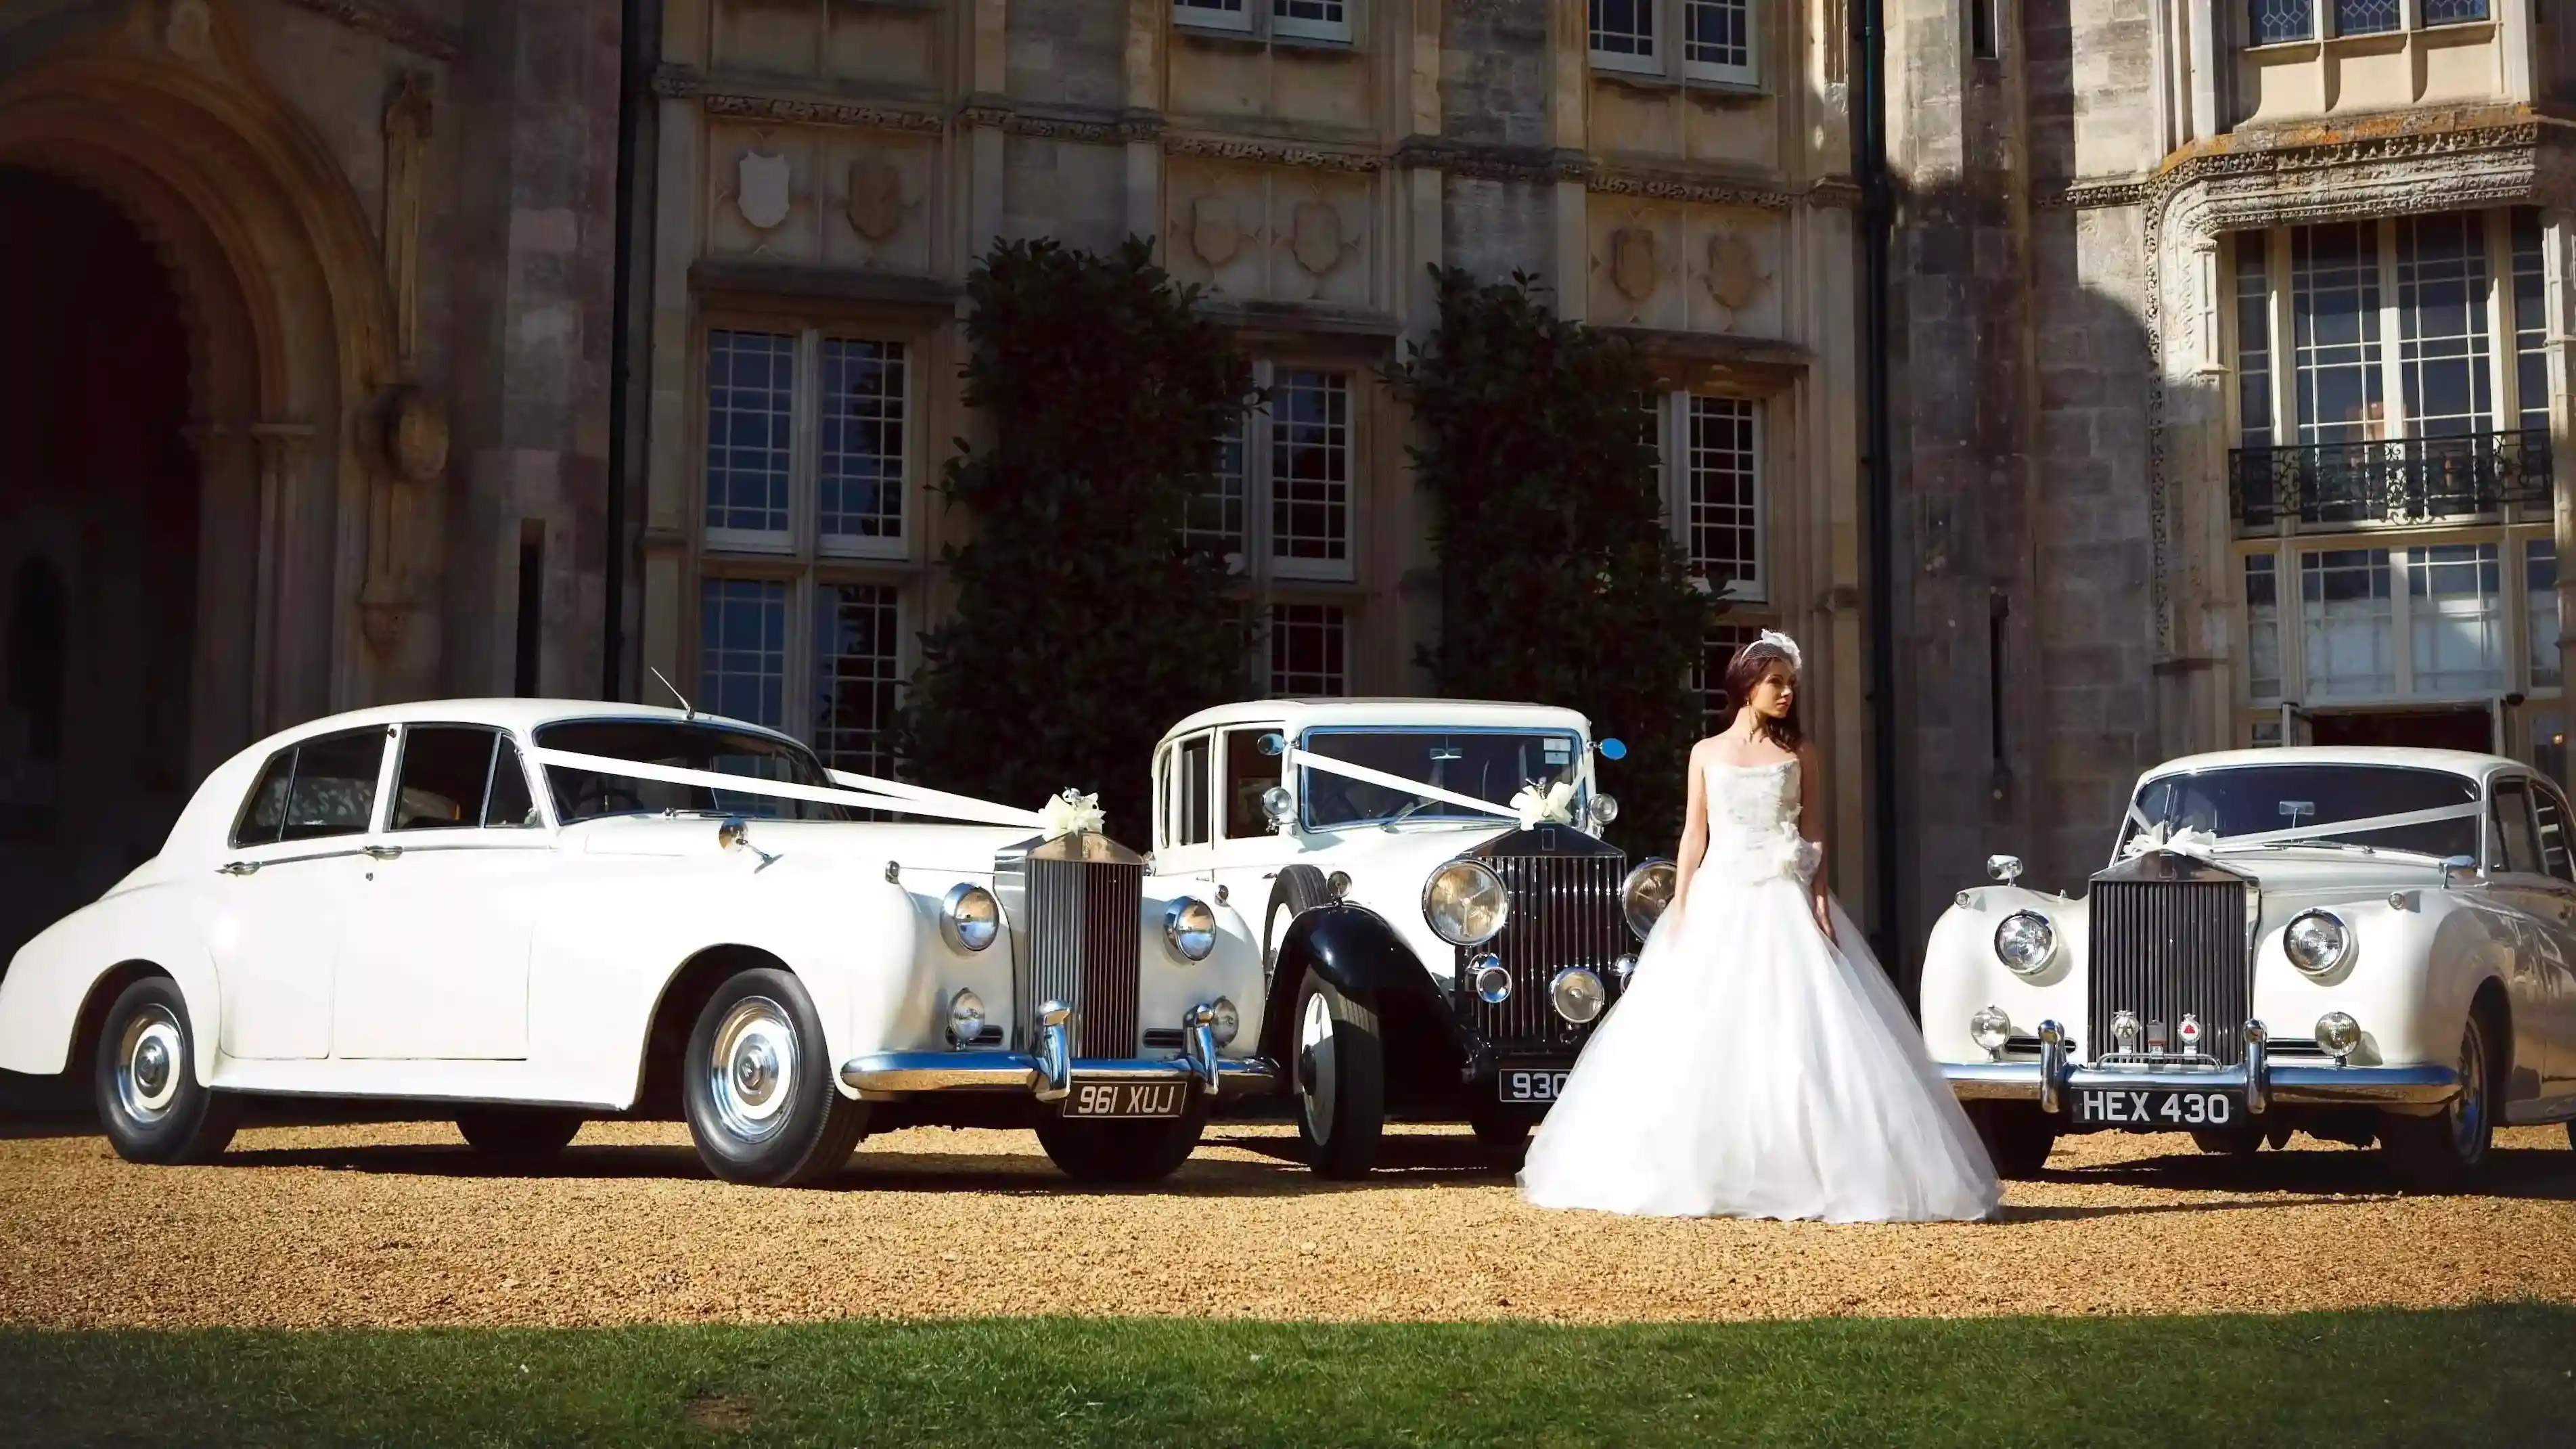 Selection of three classic and Vintage Rolls-Royce in White with Bride wearing a white wedding dress standing in the middle of the vehicles. Background is a popular wedding venue in the style of a castle.